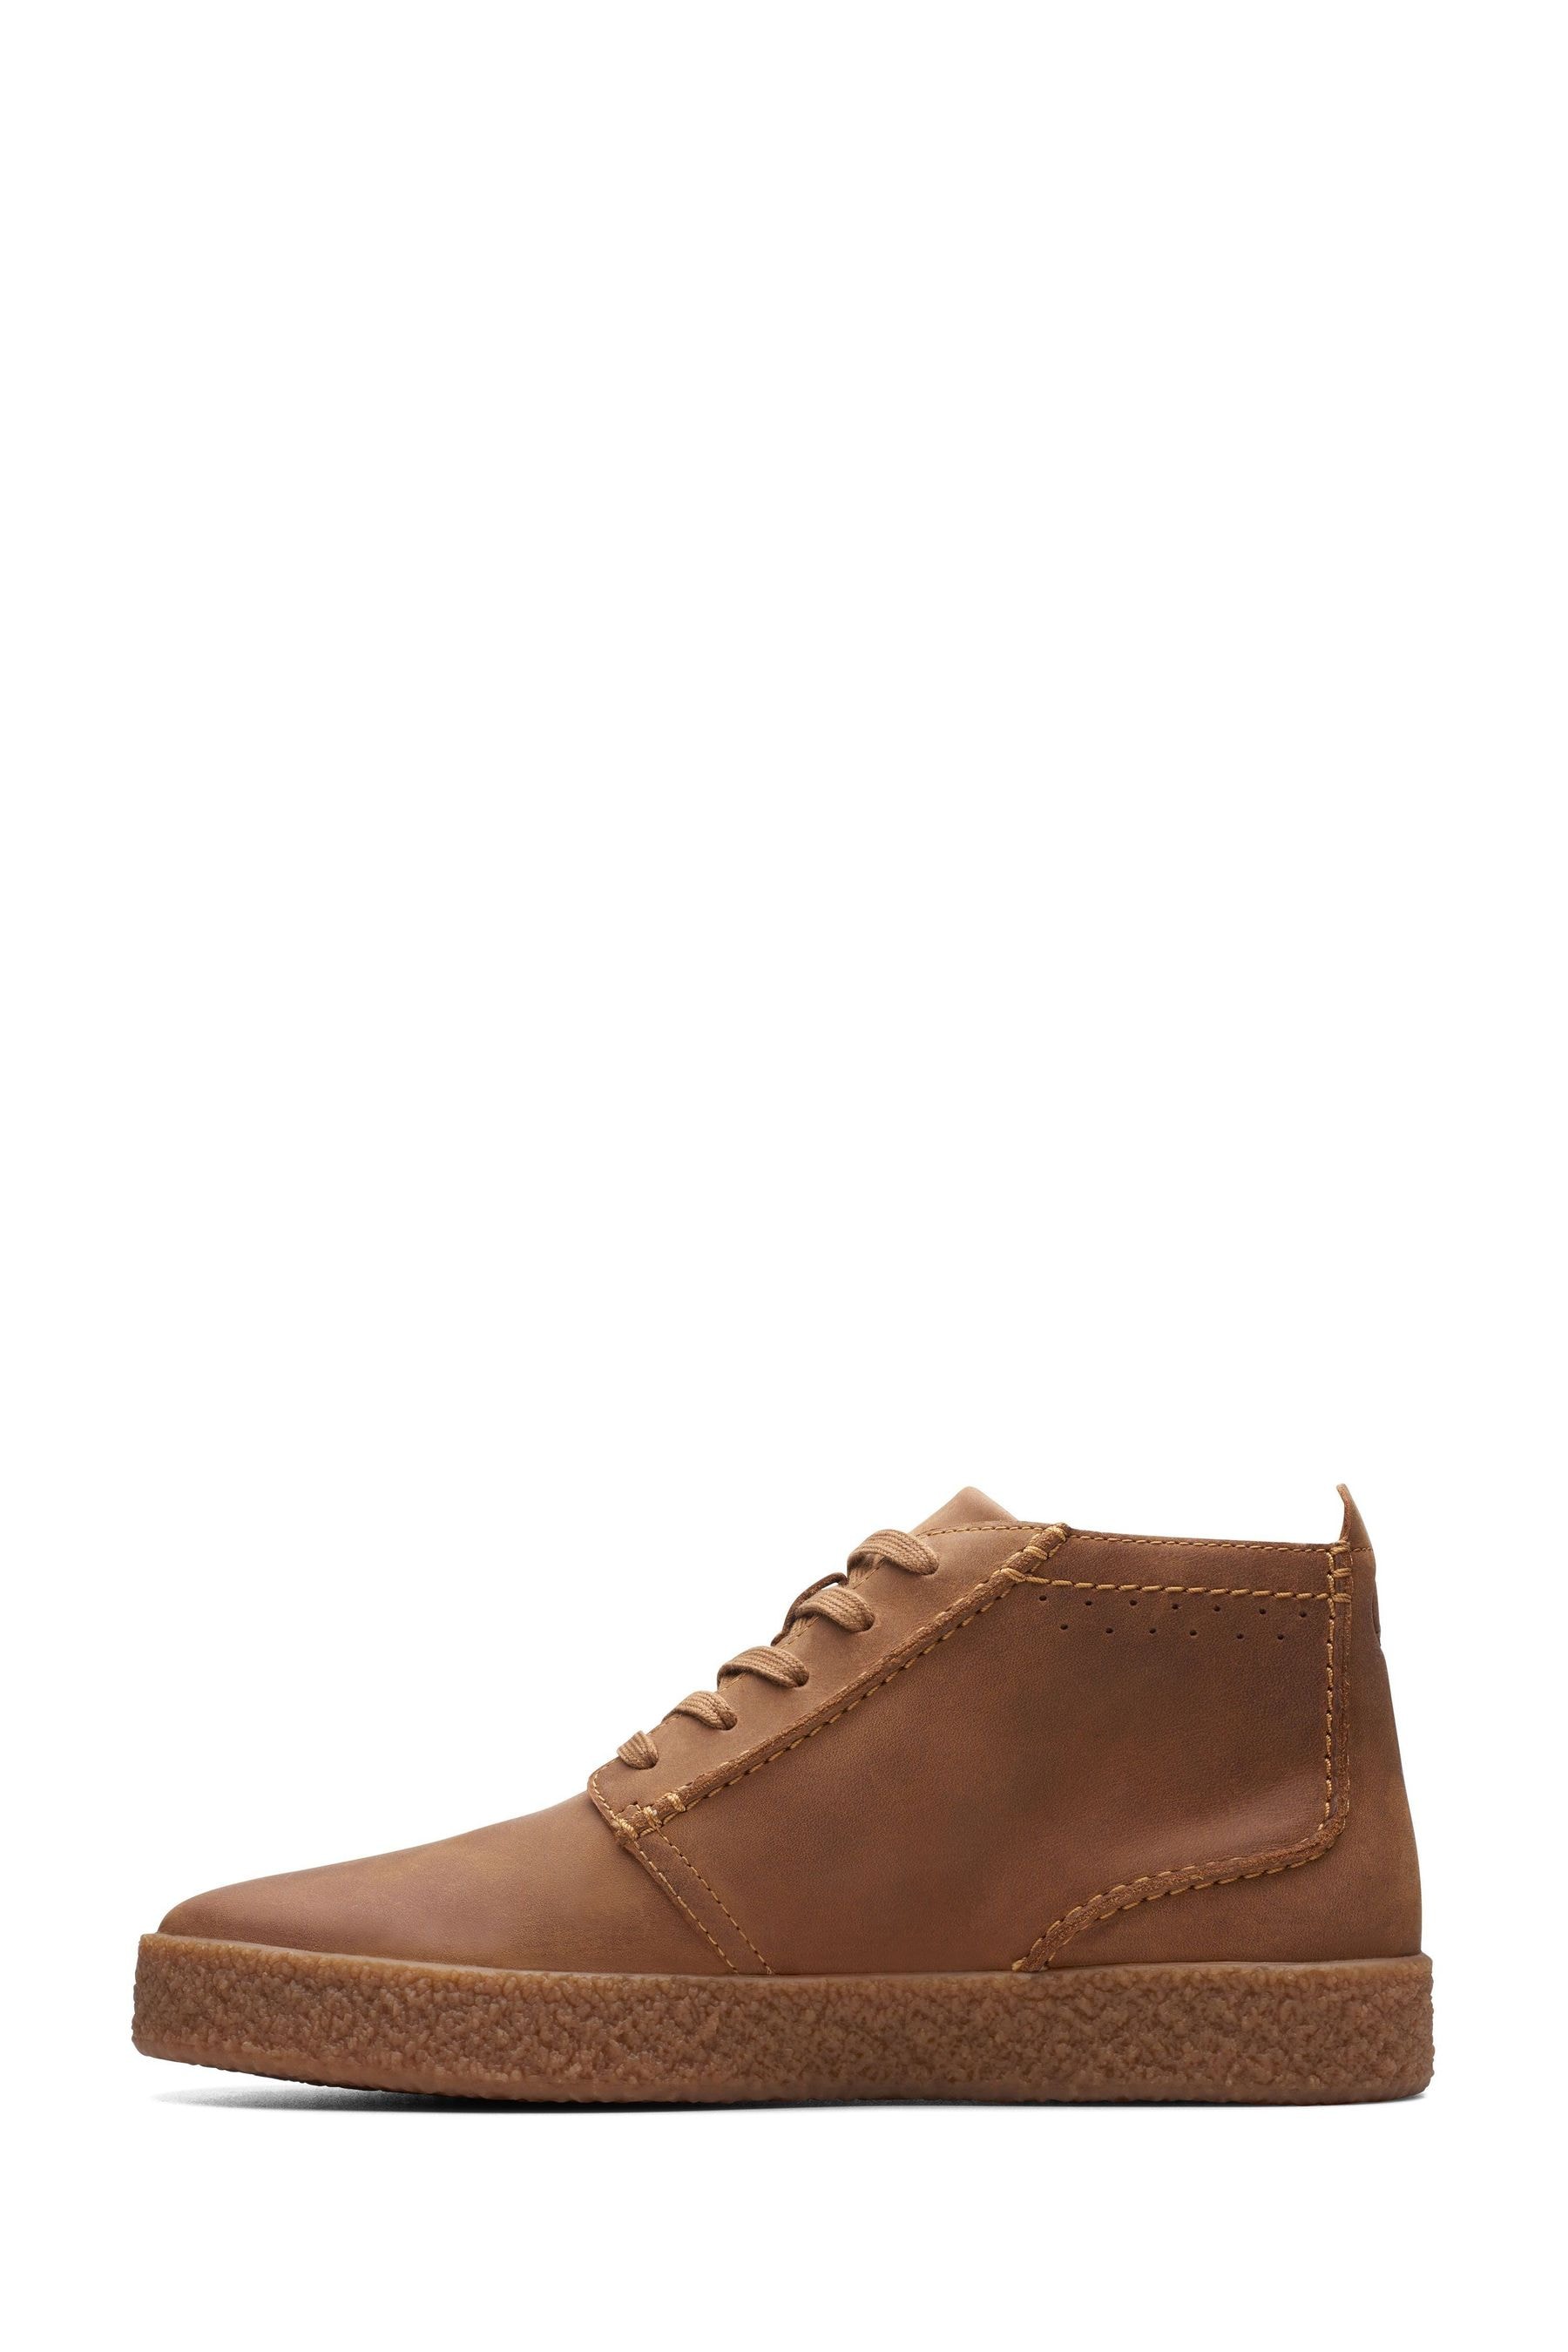 Buy Clarks Brown Lea Streethill Mid Boots from the Next UK online shop